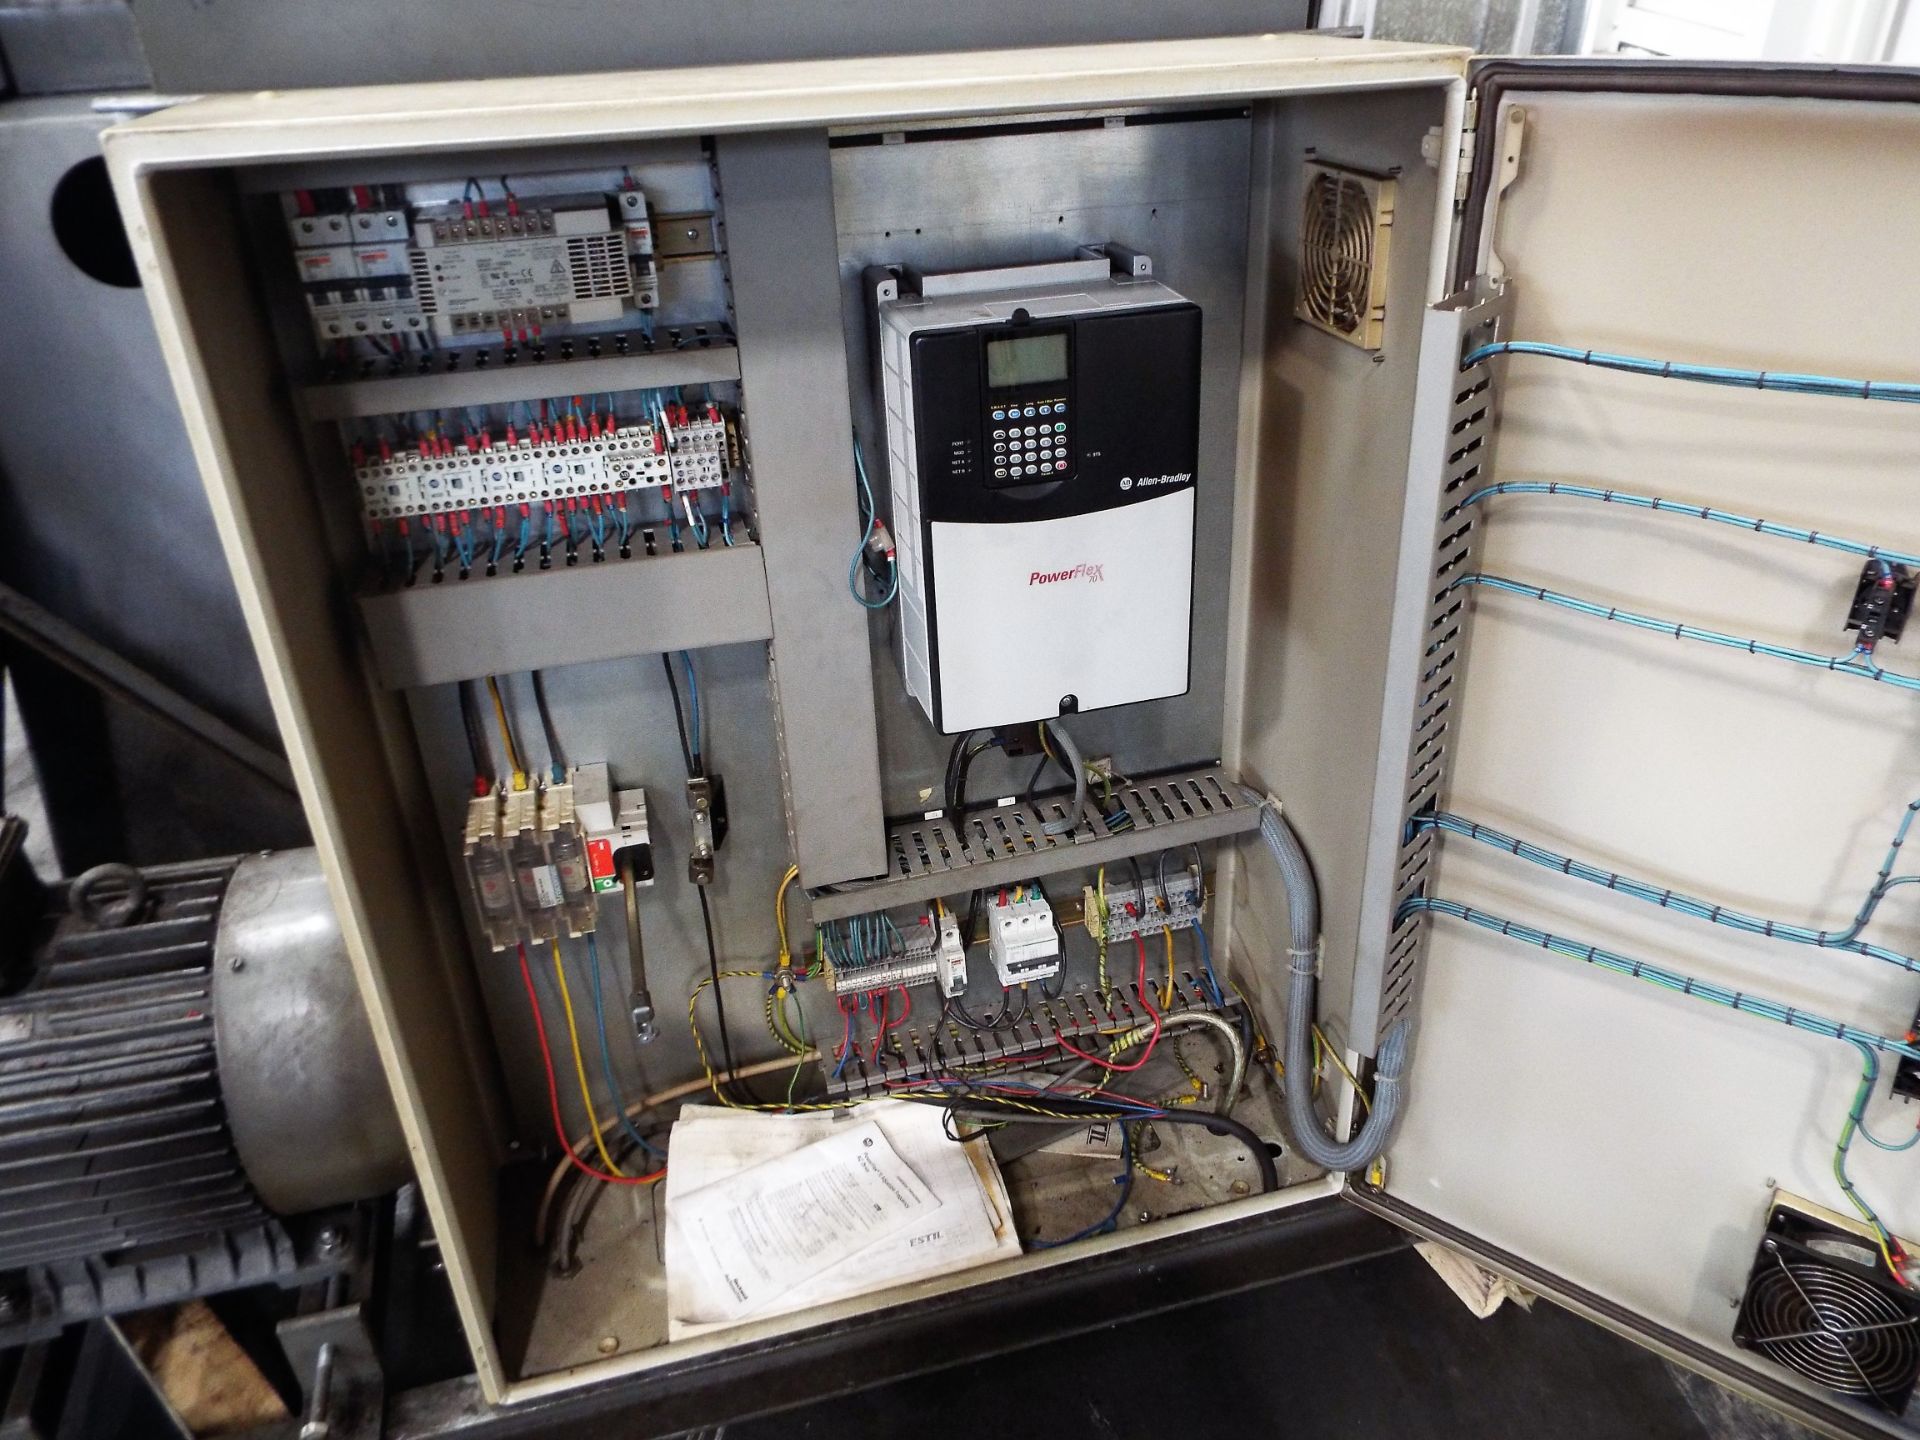 Alfa Fans 15KW Invertor Controlled Localised Exhaust Ventilation Unit. - Image 3 of 10